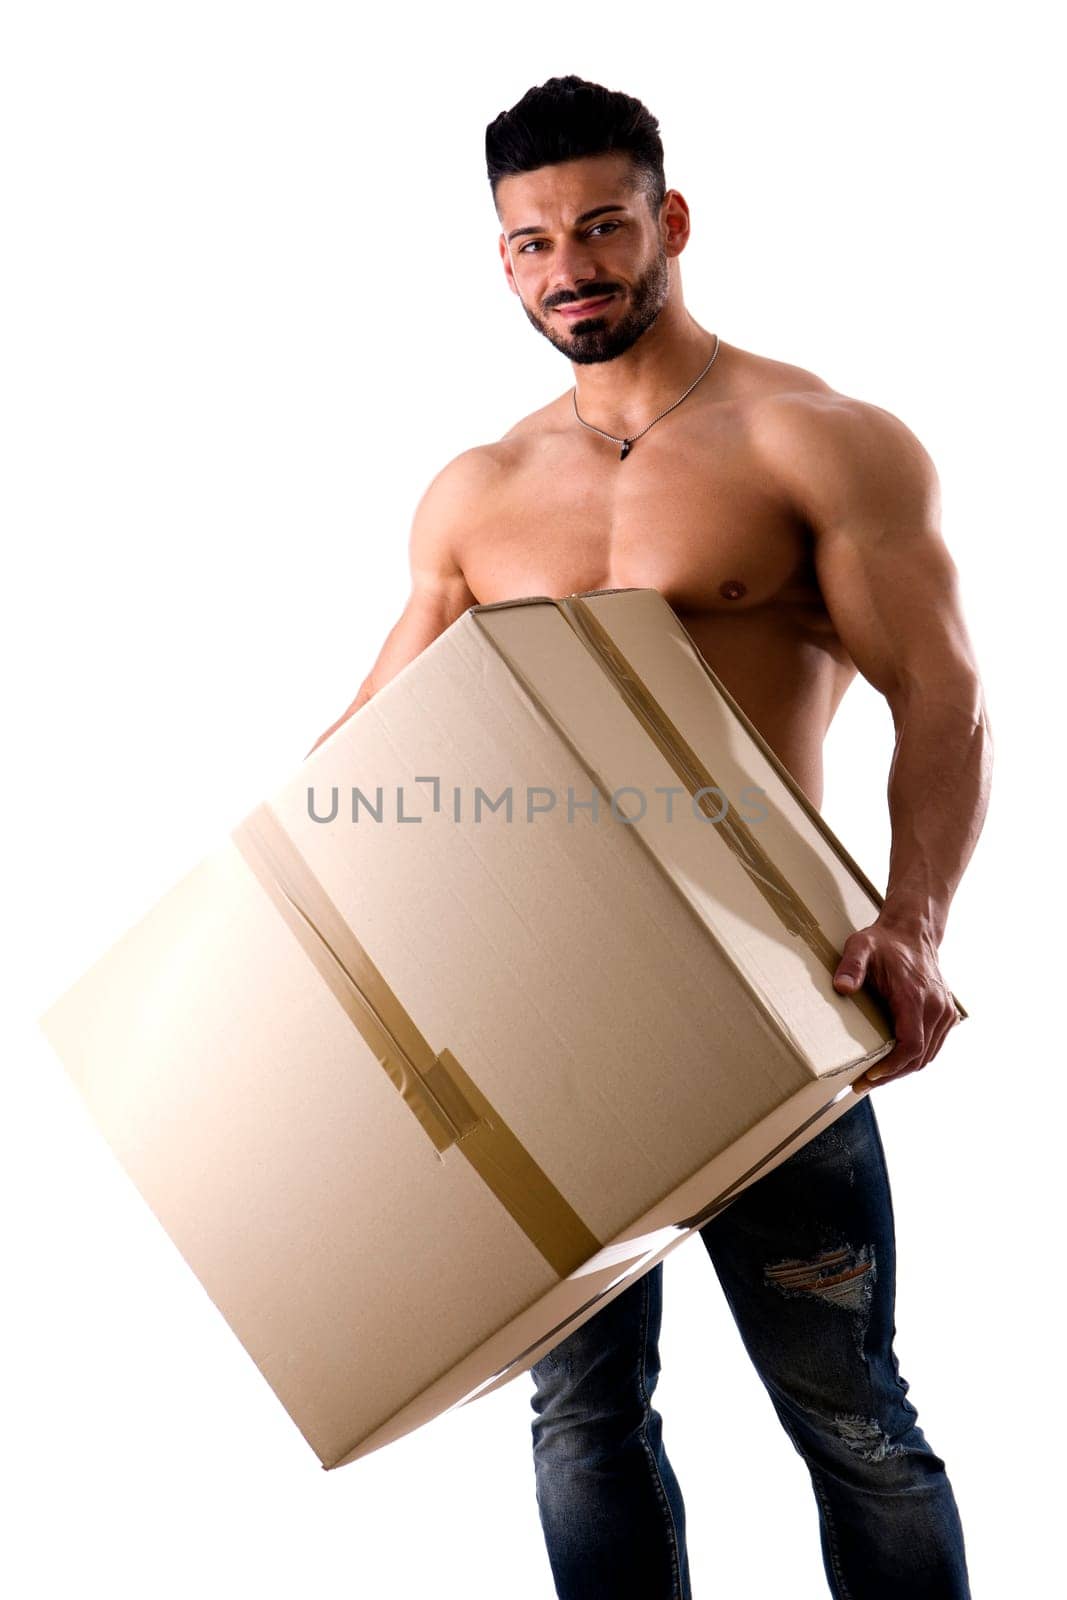 Photo of a muscular man carrying a heavy load by artofphoto